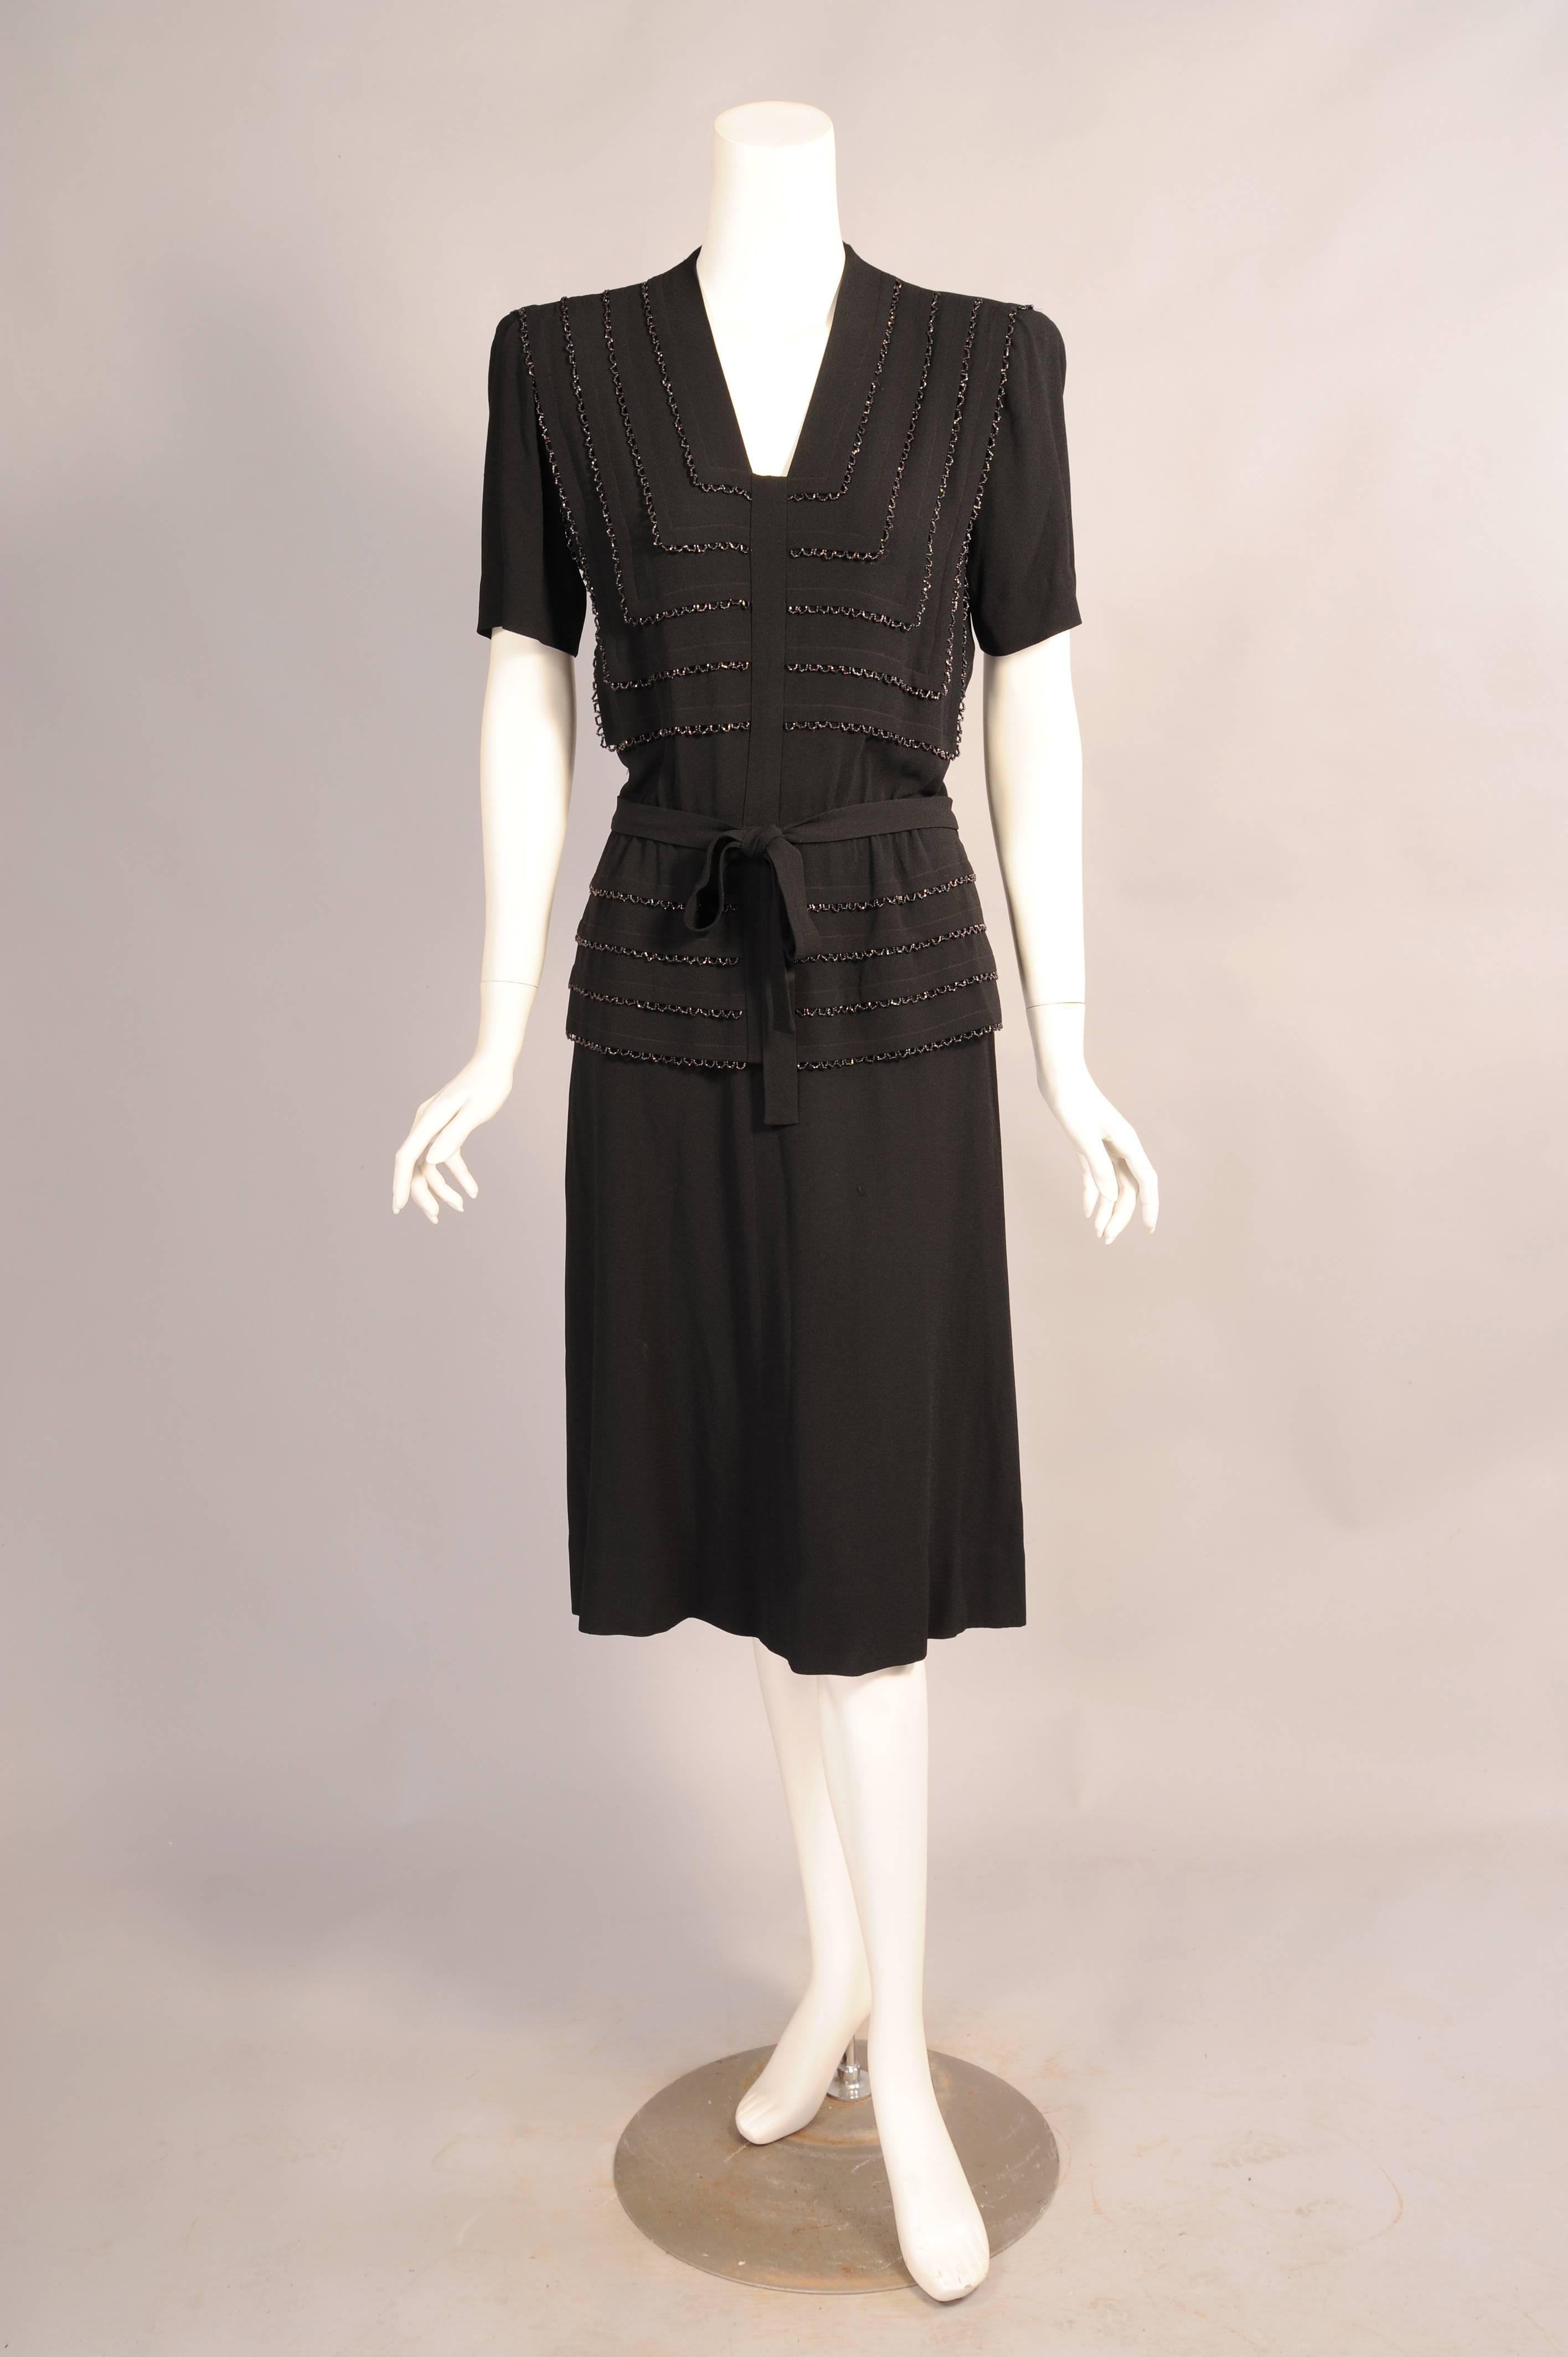 This elegant black crepe dress from the 1940's has a V shaped neckline, short sleeves and a natural waist with self tie. The bodice and peplum are horizontally pleated and these pleats are edged with scalloped black caviar bead work. The dress has